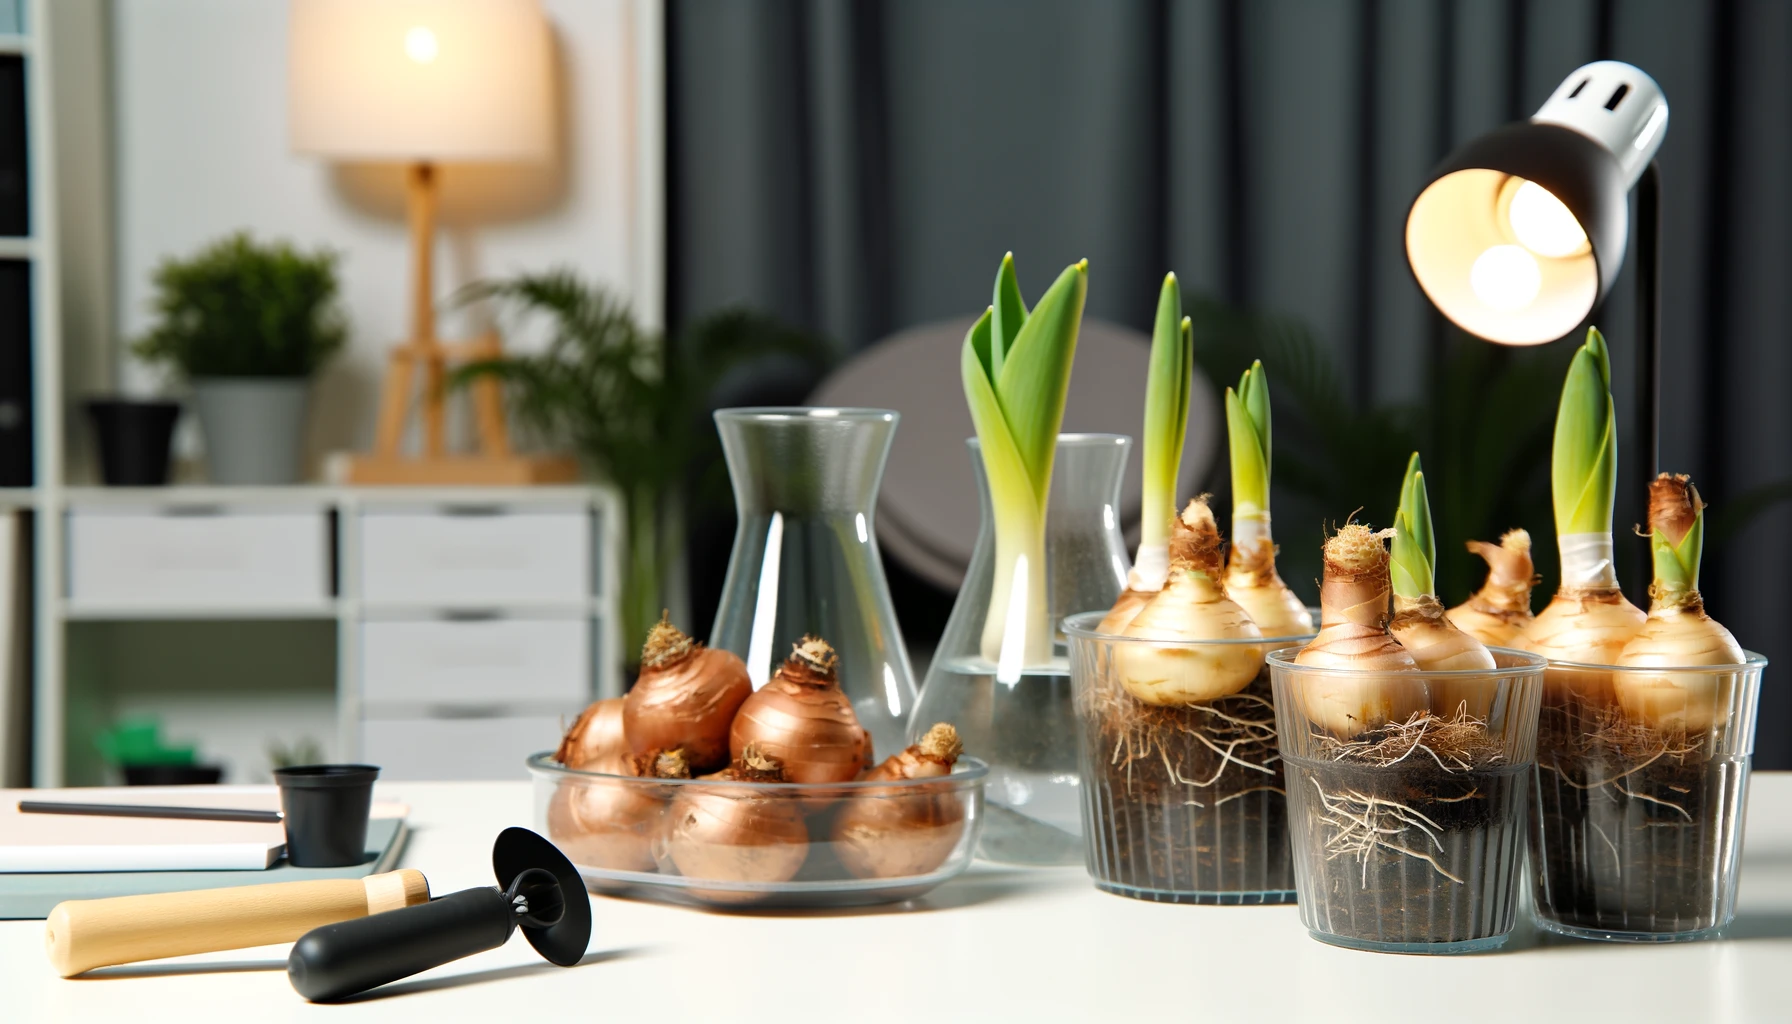 Indoor gardening with sprouting bulbs and modern decor.